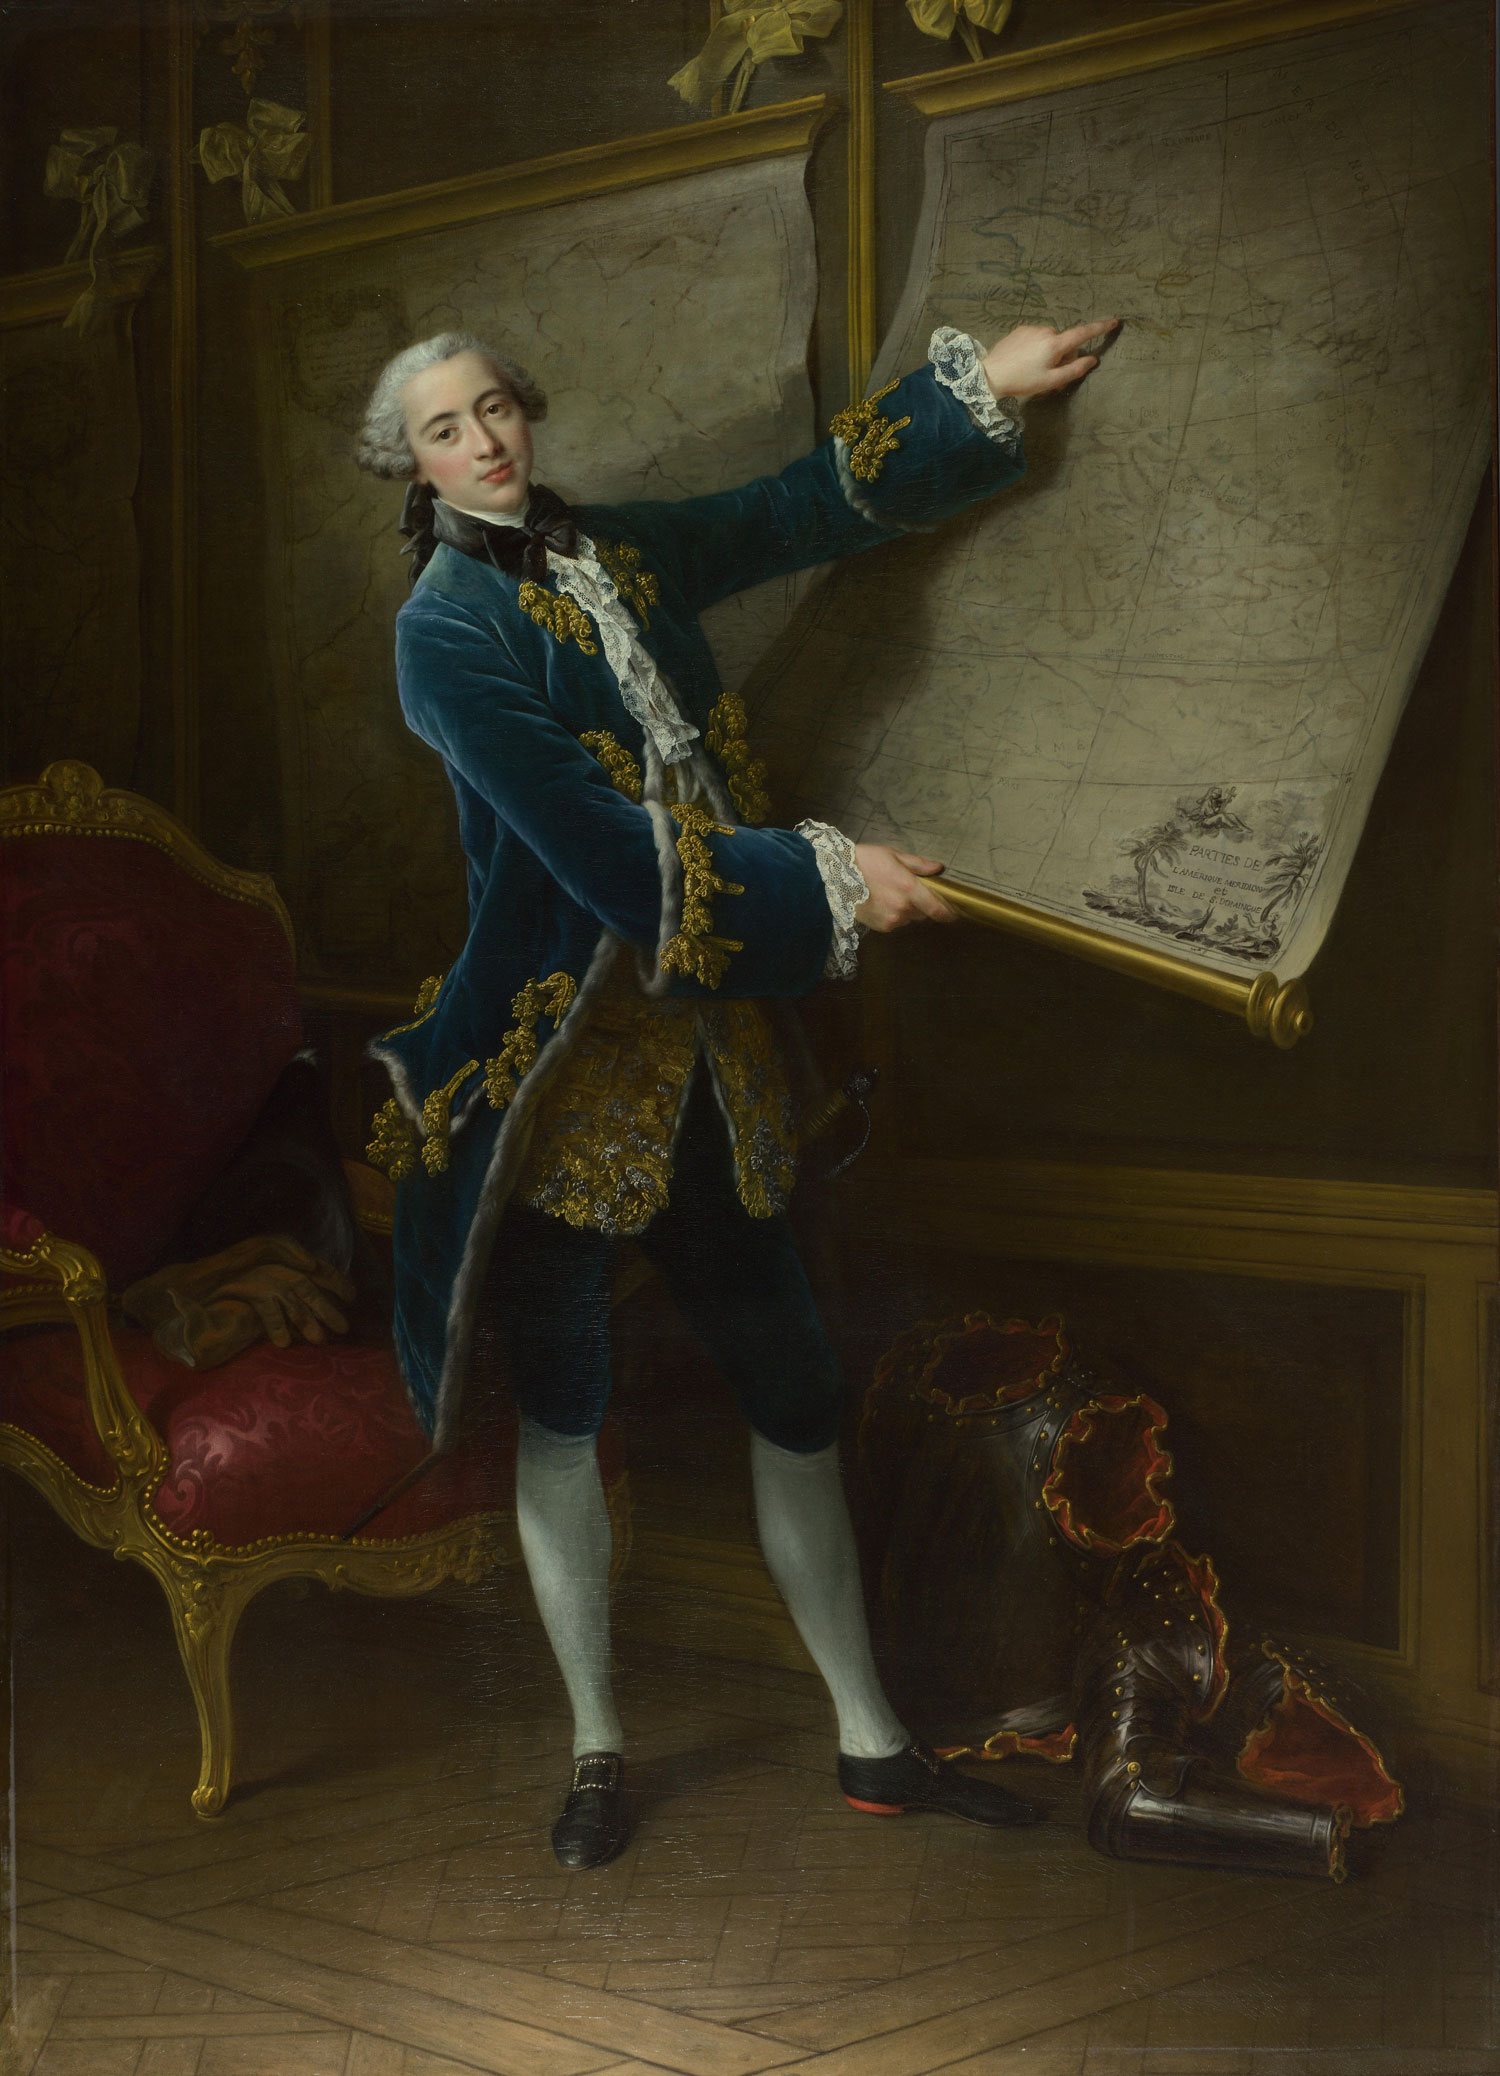 Portrait of the Count of Vaudreuil, painted by Hubert Drouais in 1758, National Gallery, London.